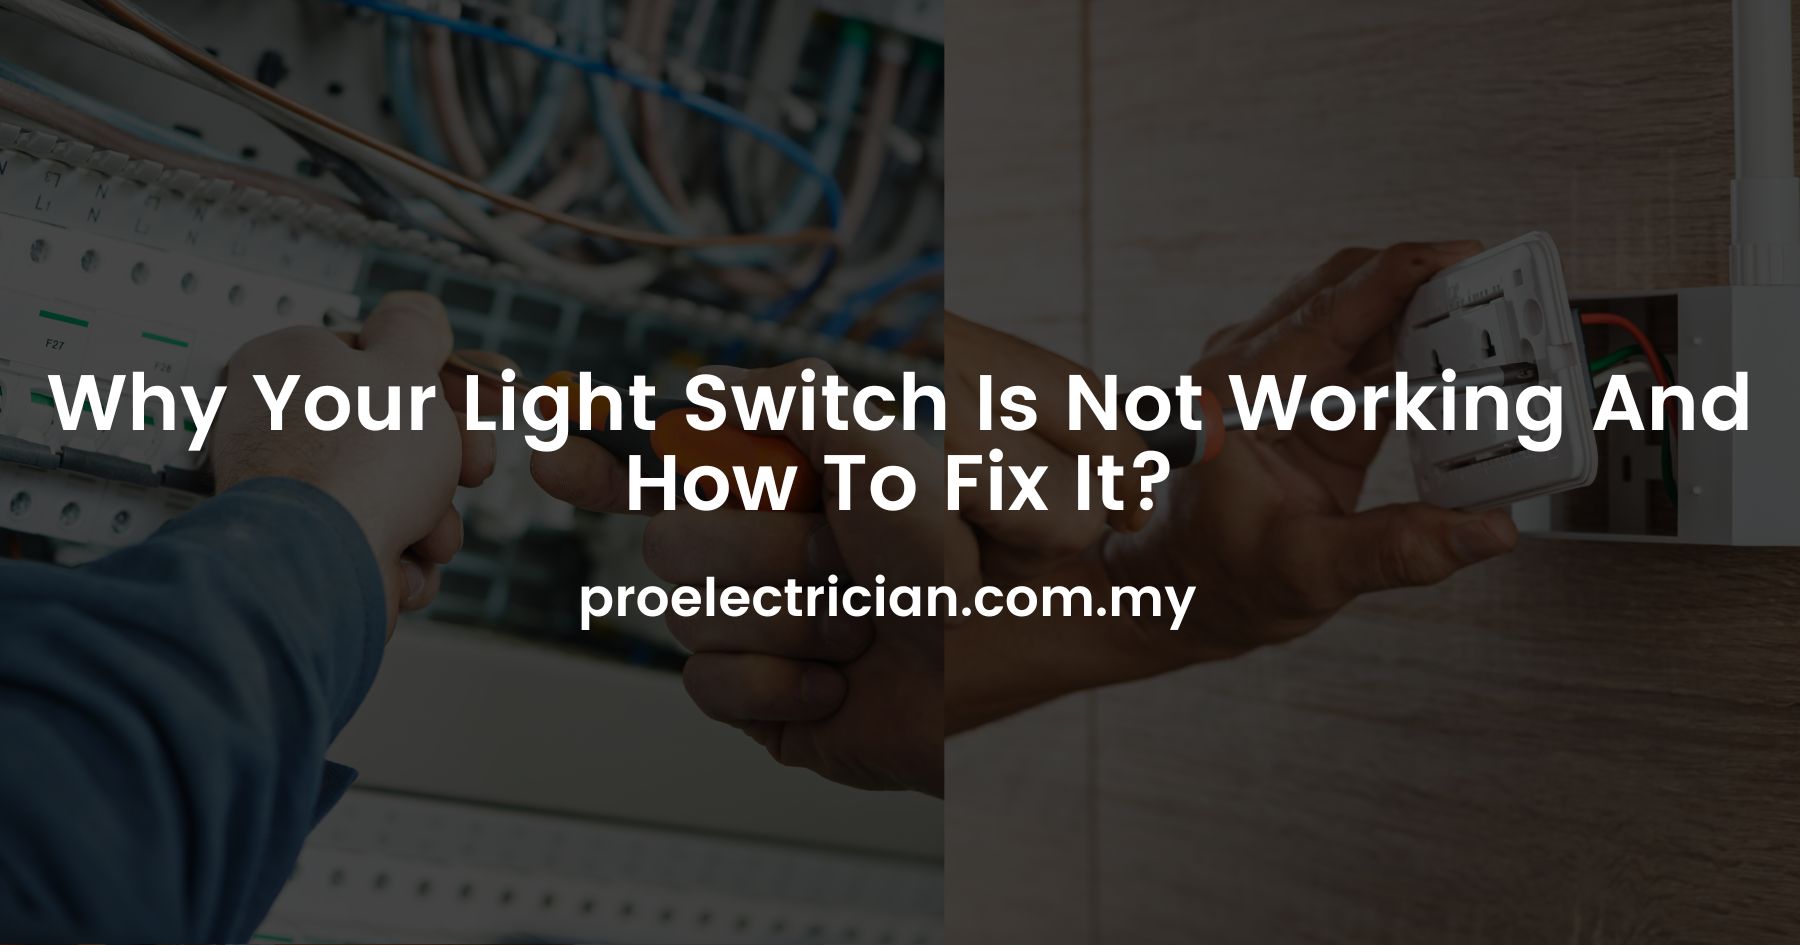 Why Your Light Switch Is Not Working And How To Fix It?